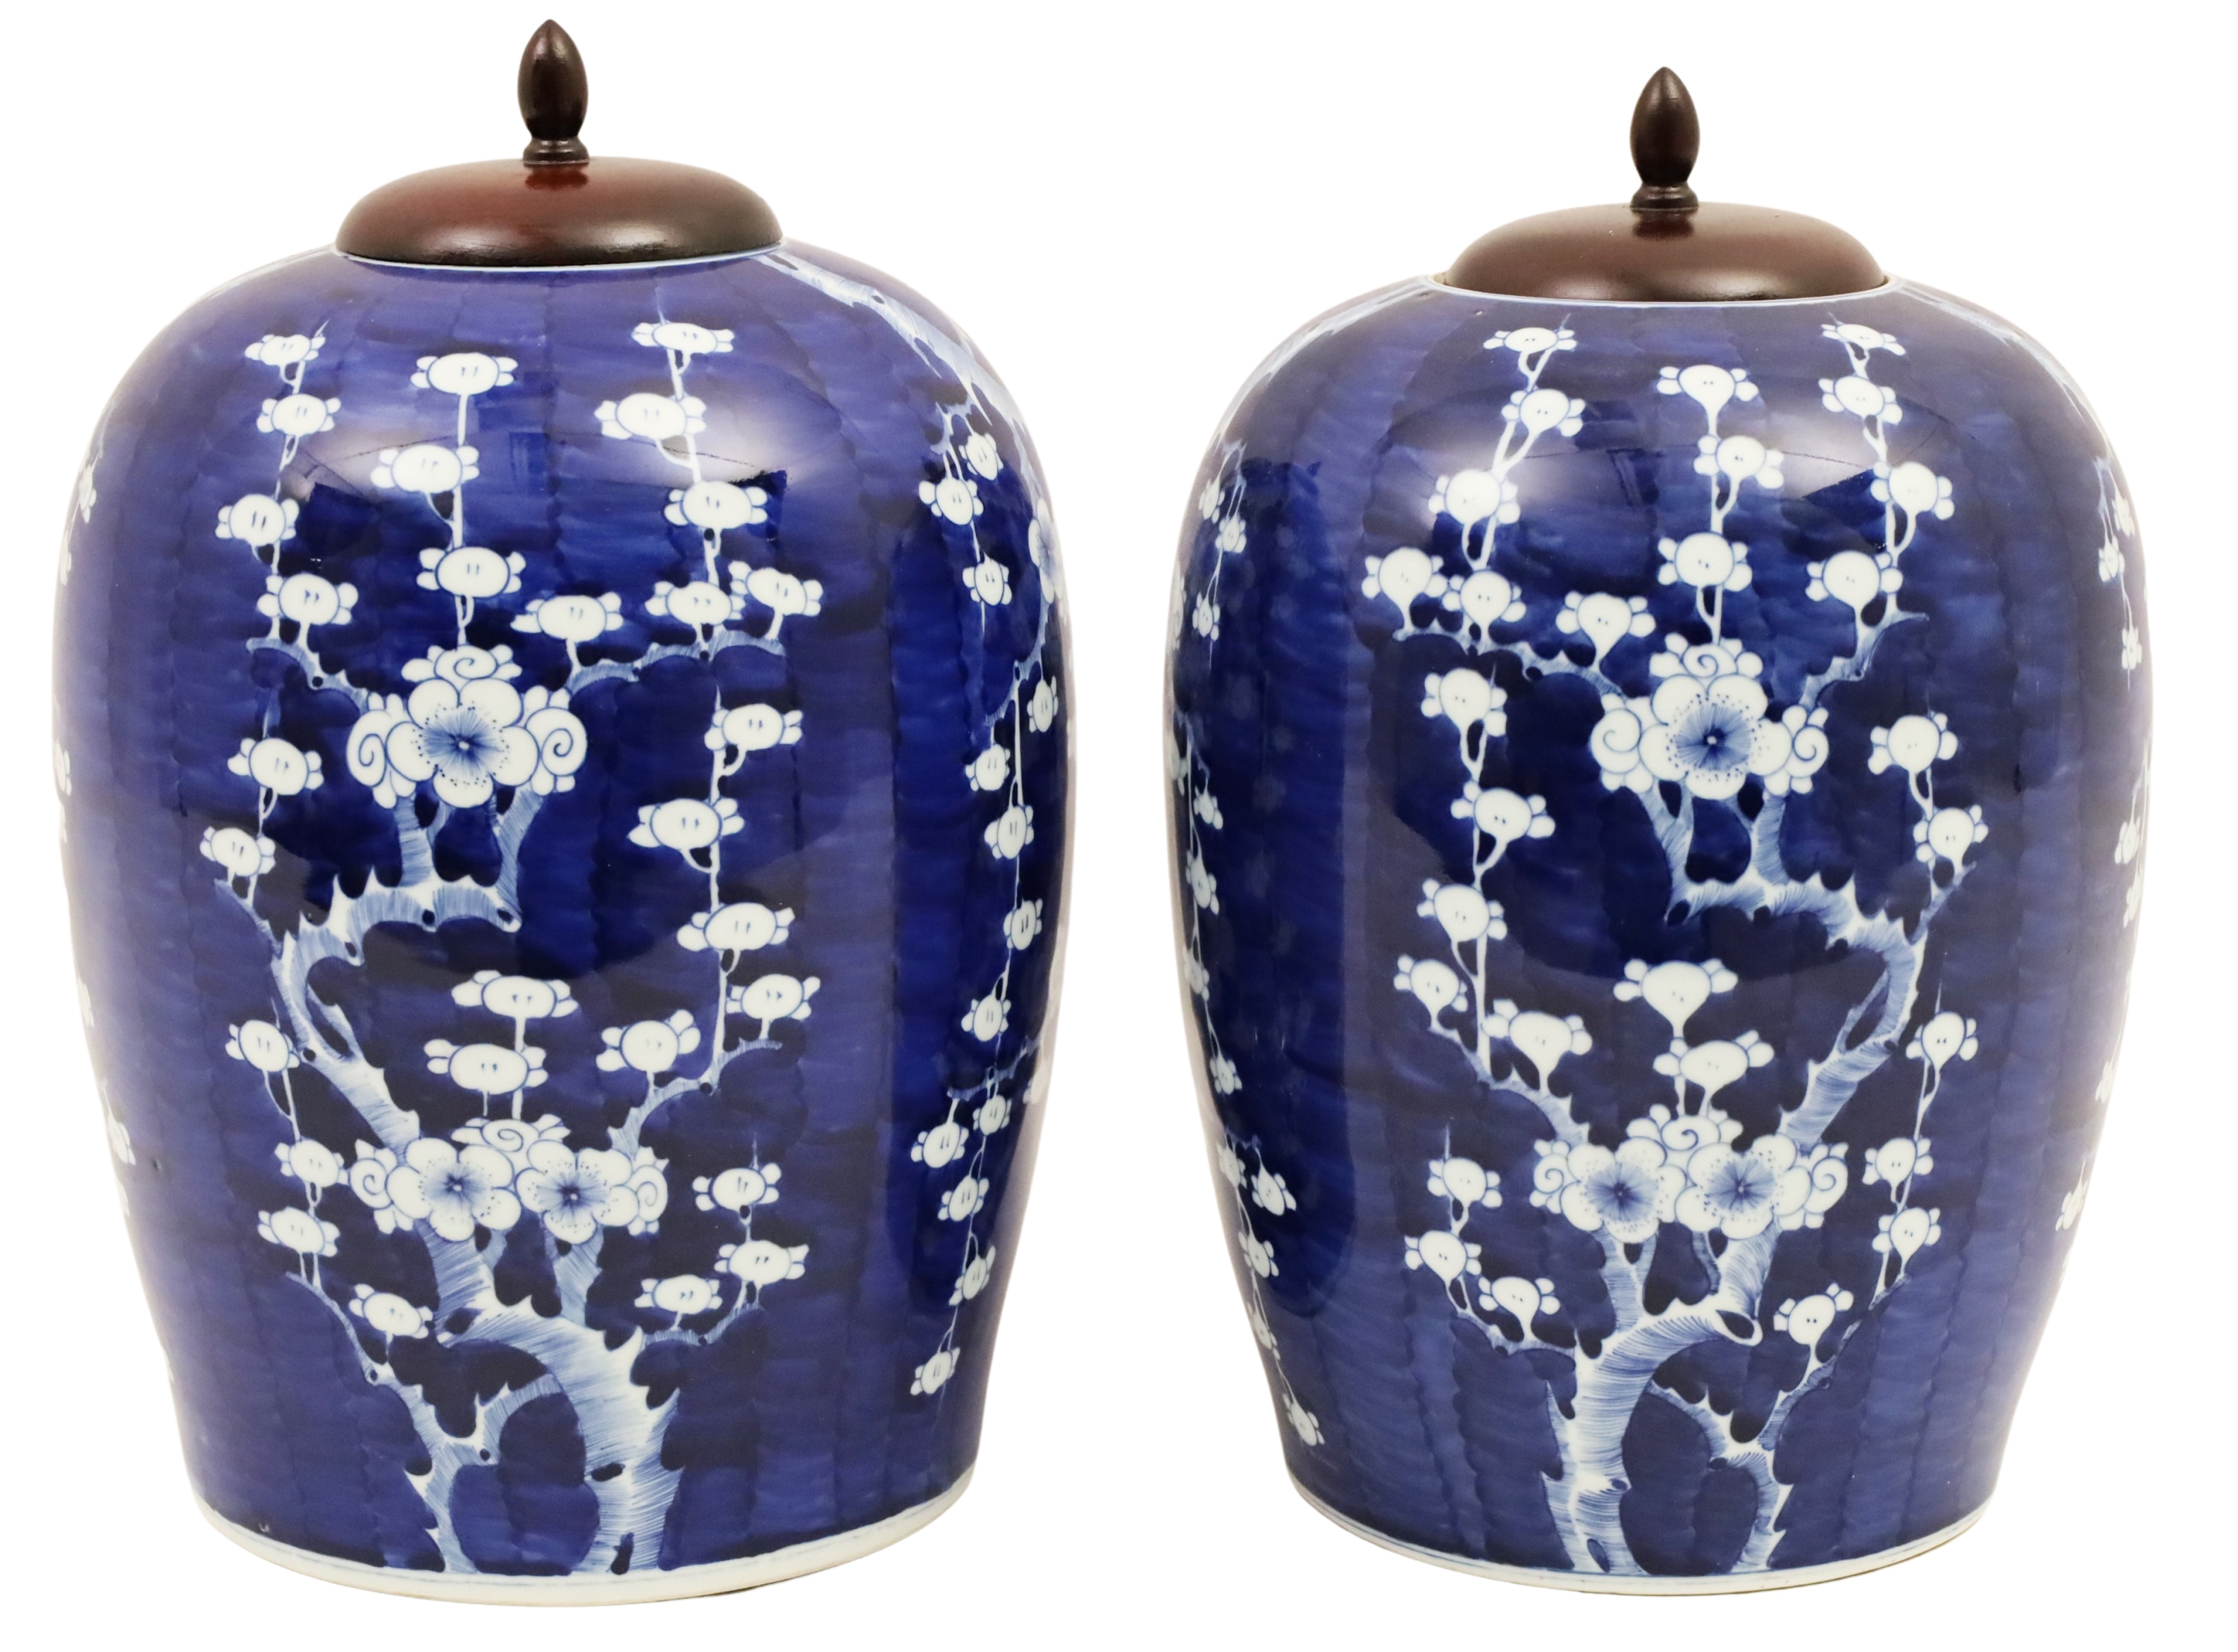 PAIR OF CHINESE GINGER JARS A near 2f8c9c